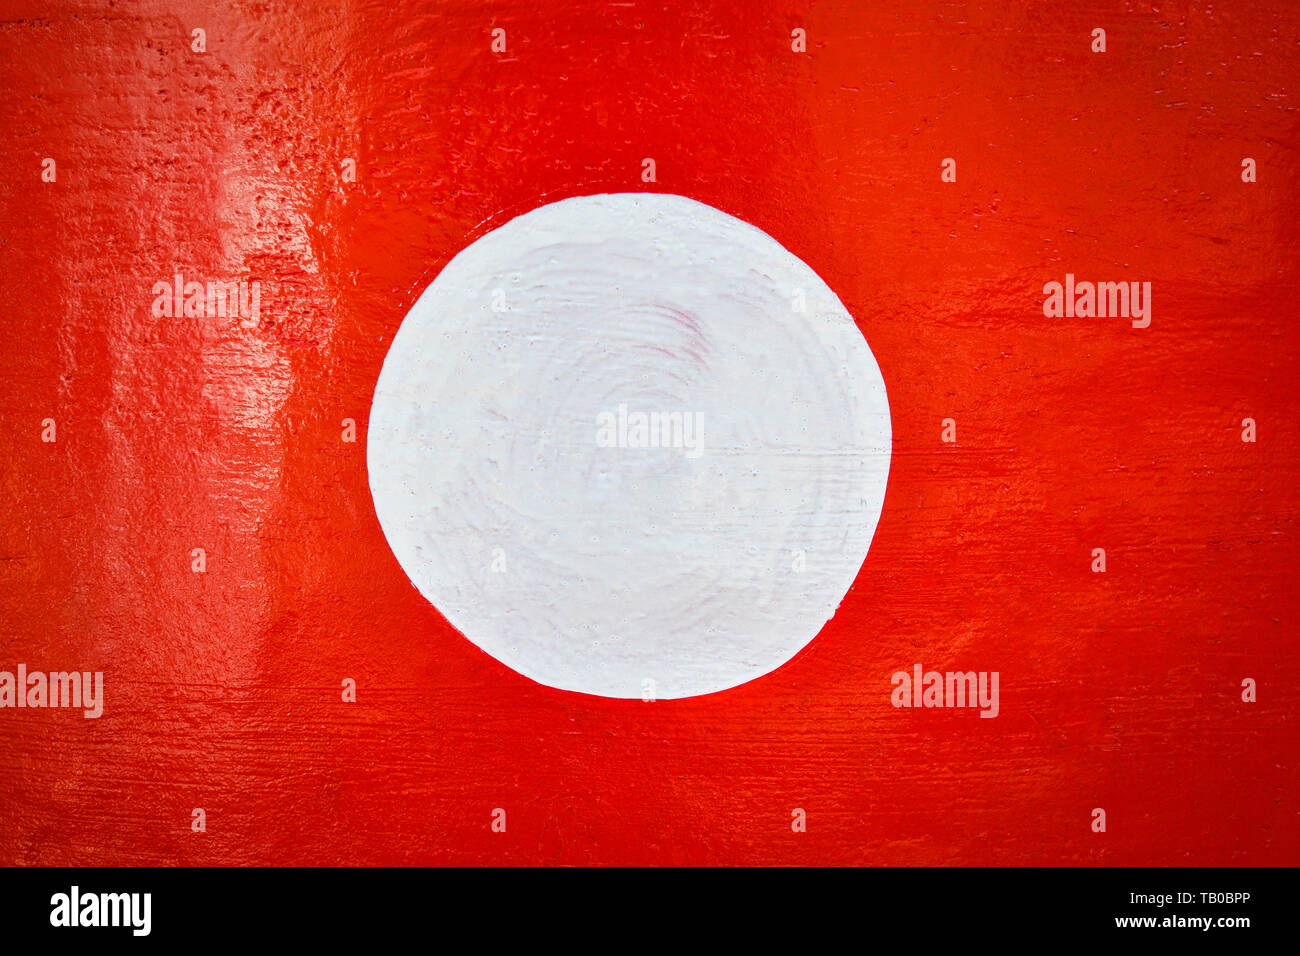 Red background and white circle on center paint on red wall Stock Photo